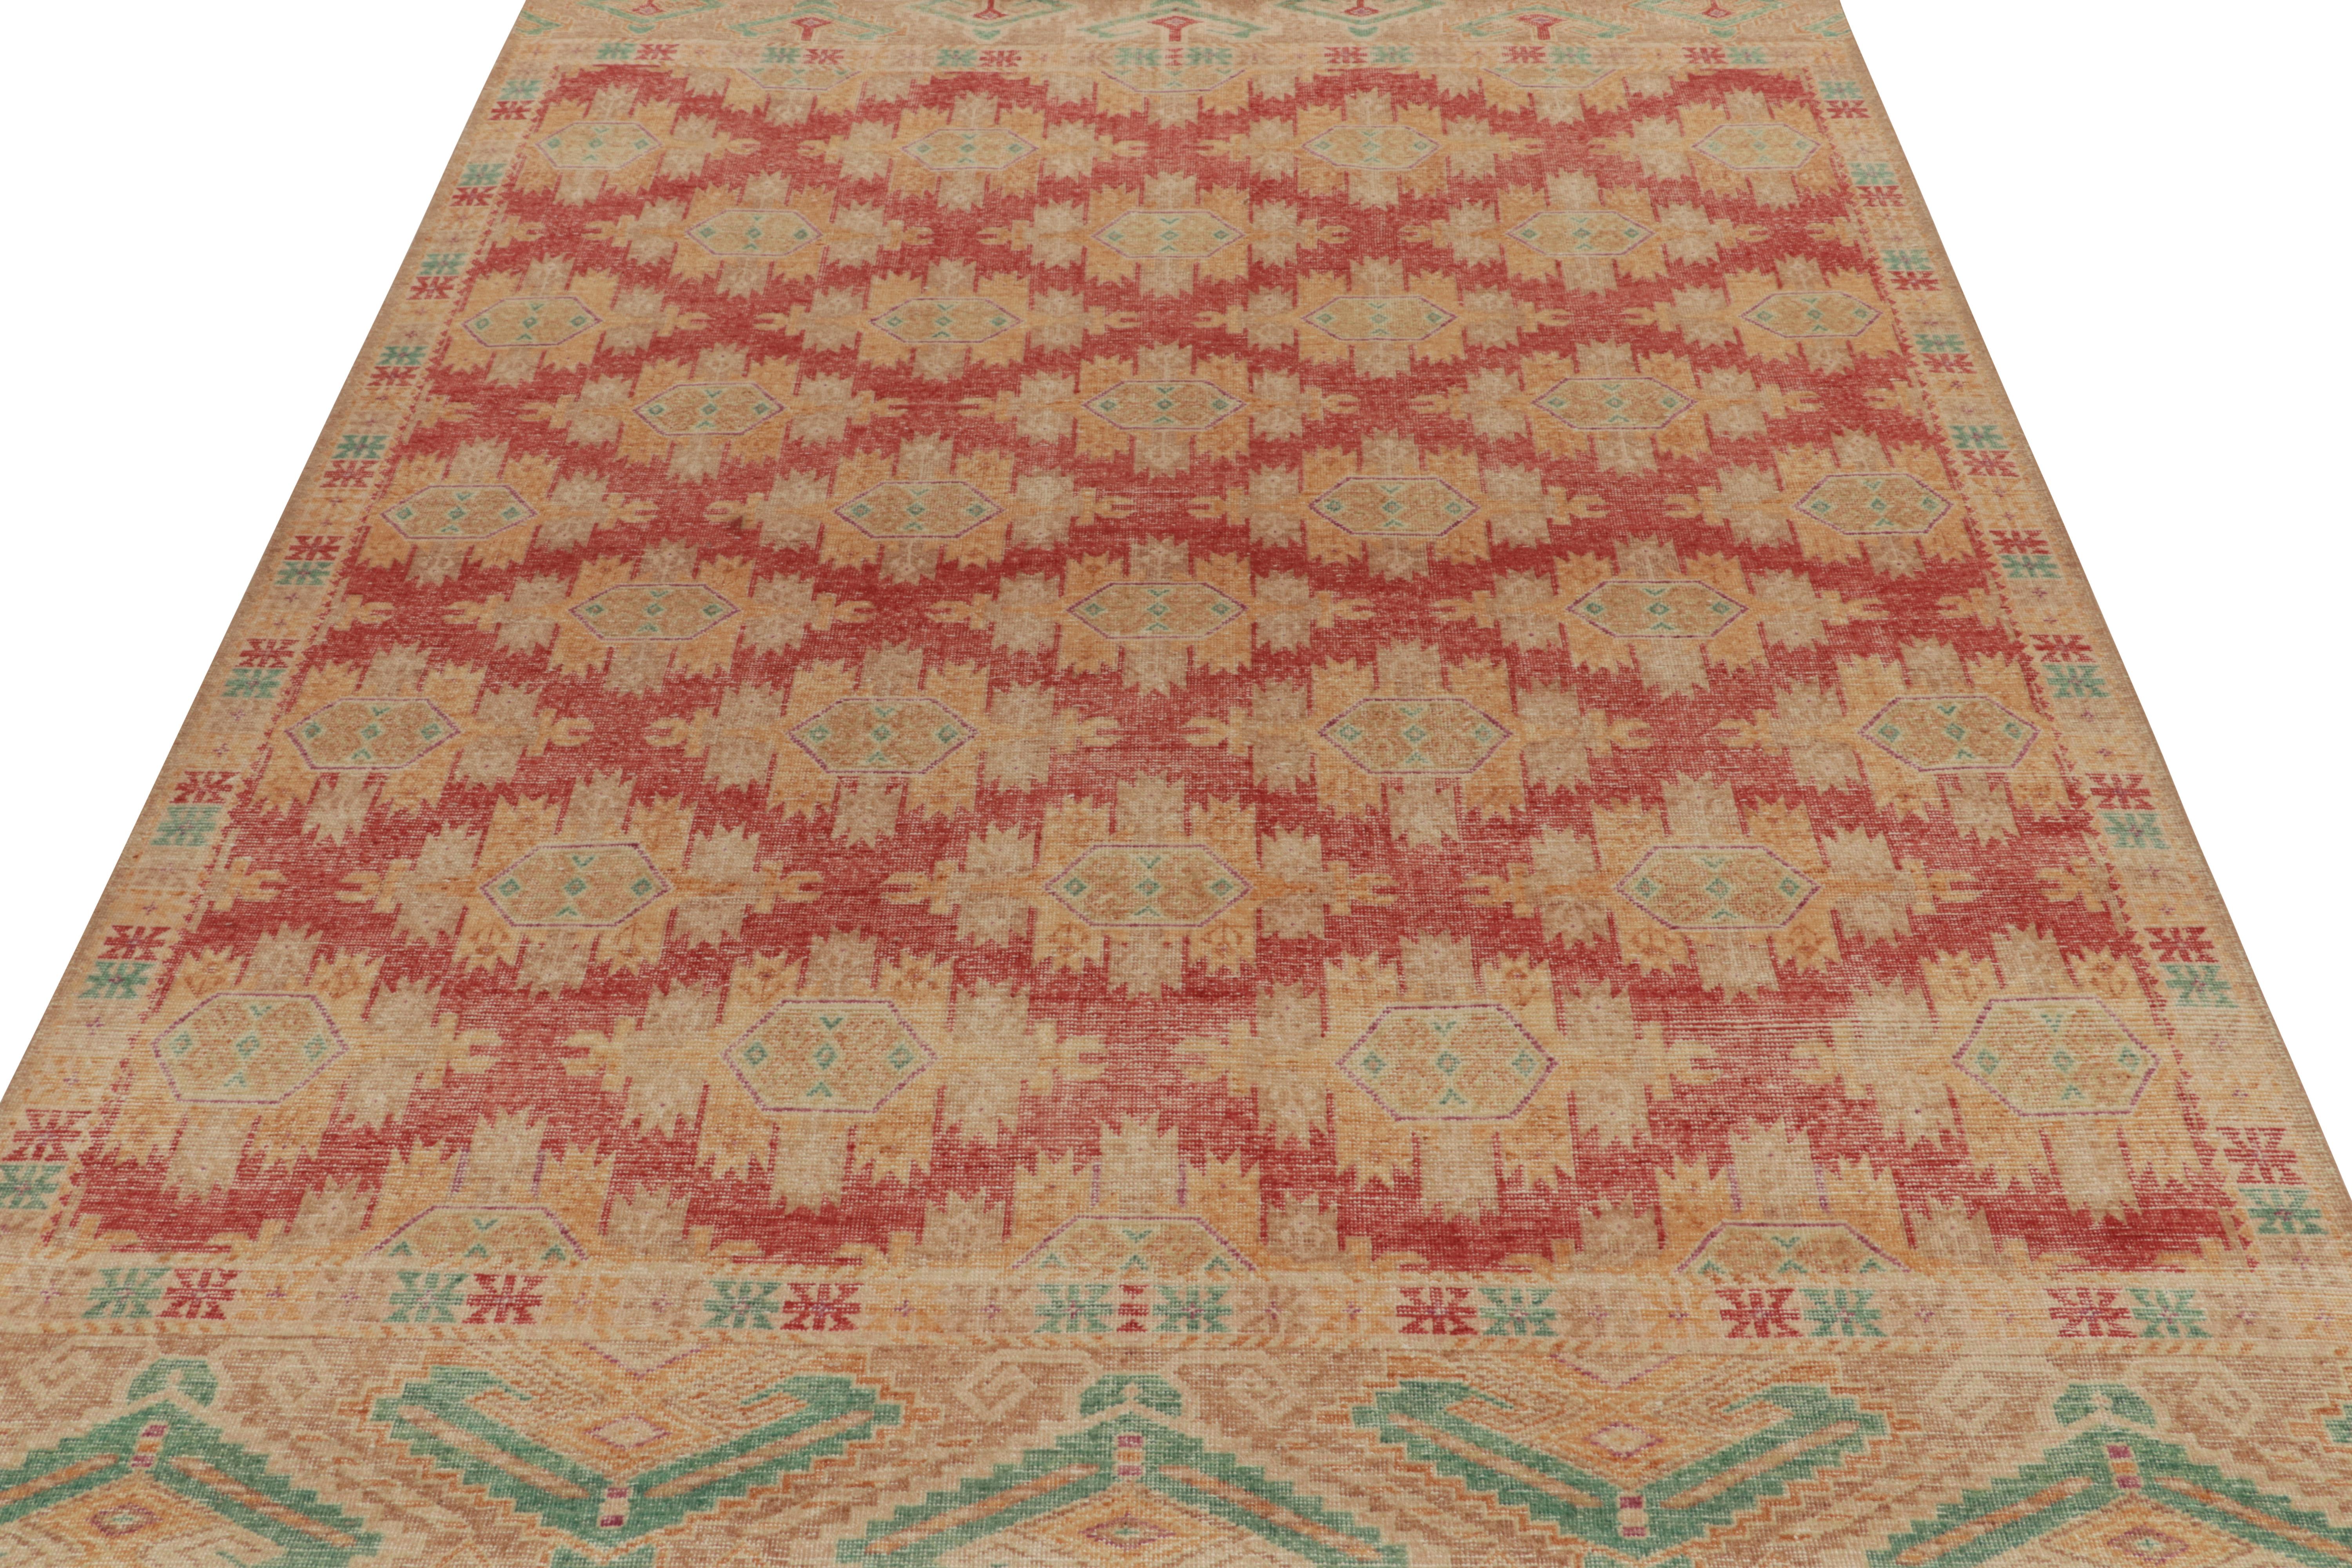 Tribal Rug & Kilim’s Distressed Bokhara Style Rug in Red, Beige & Gold Medallions For Sale